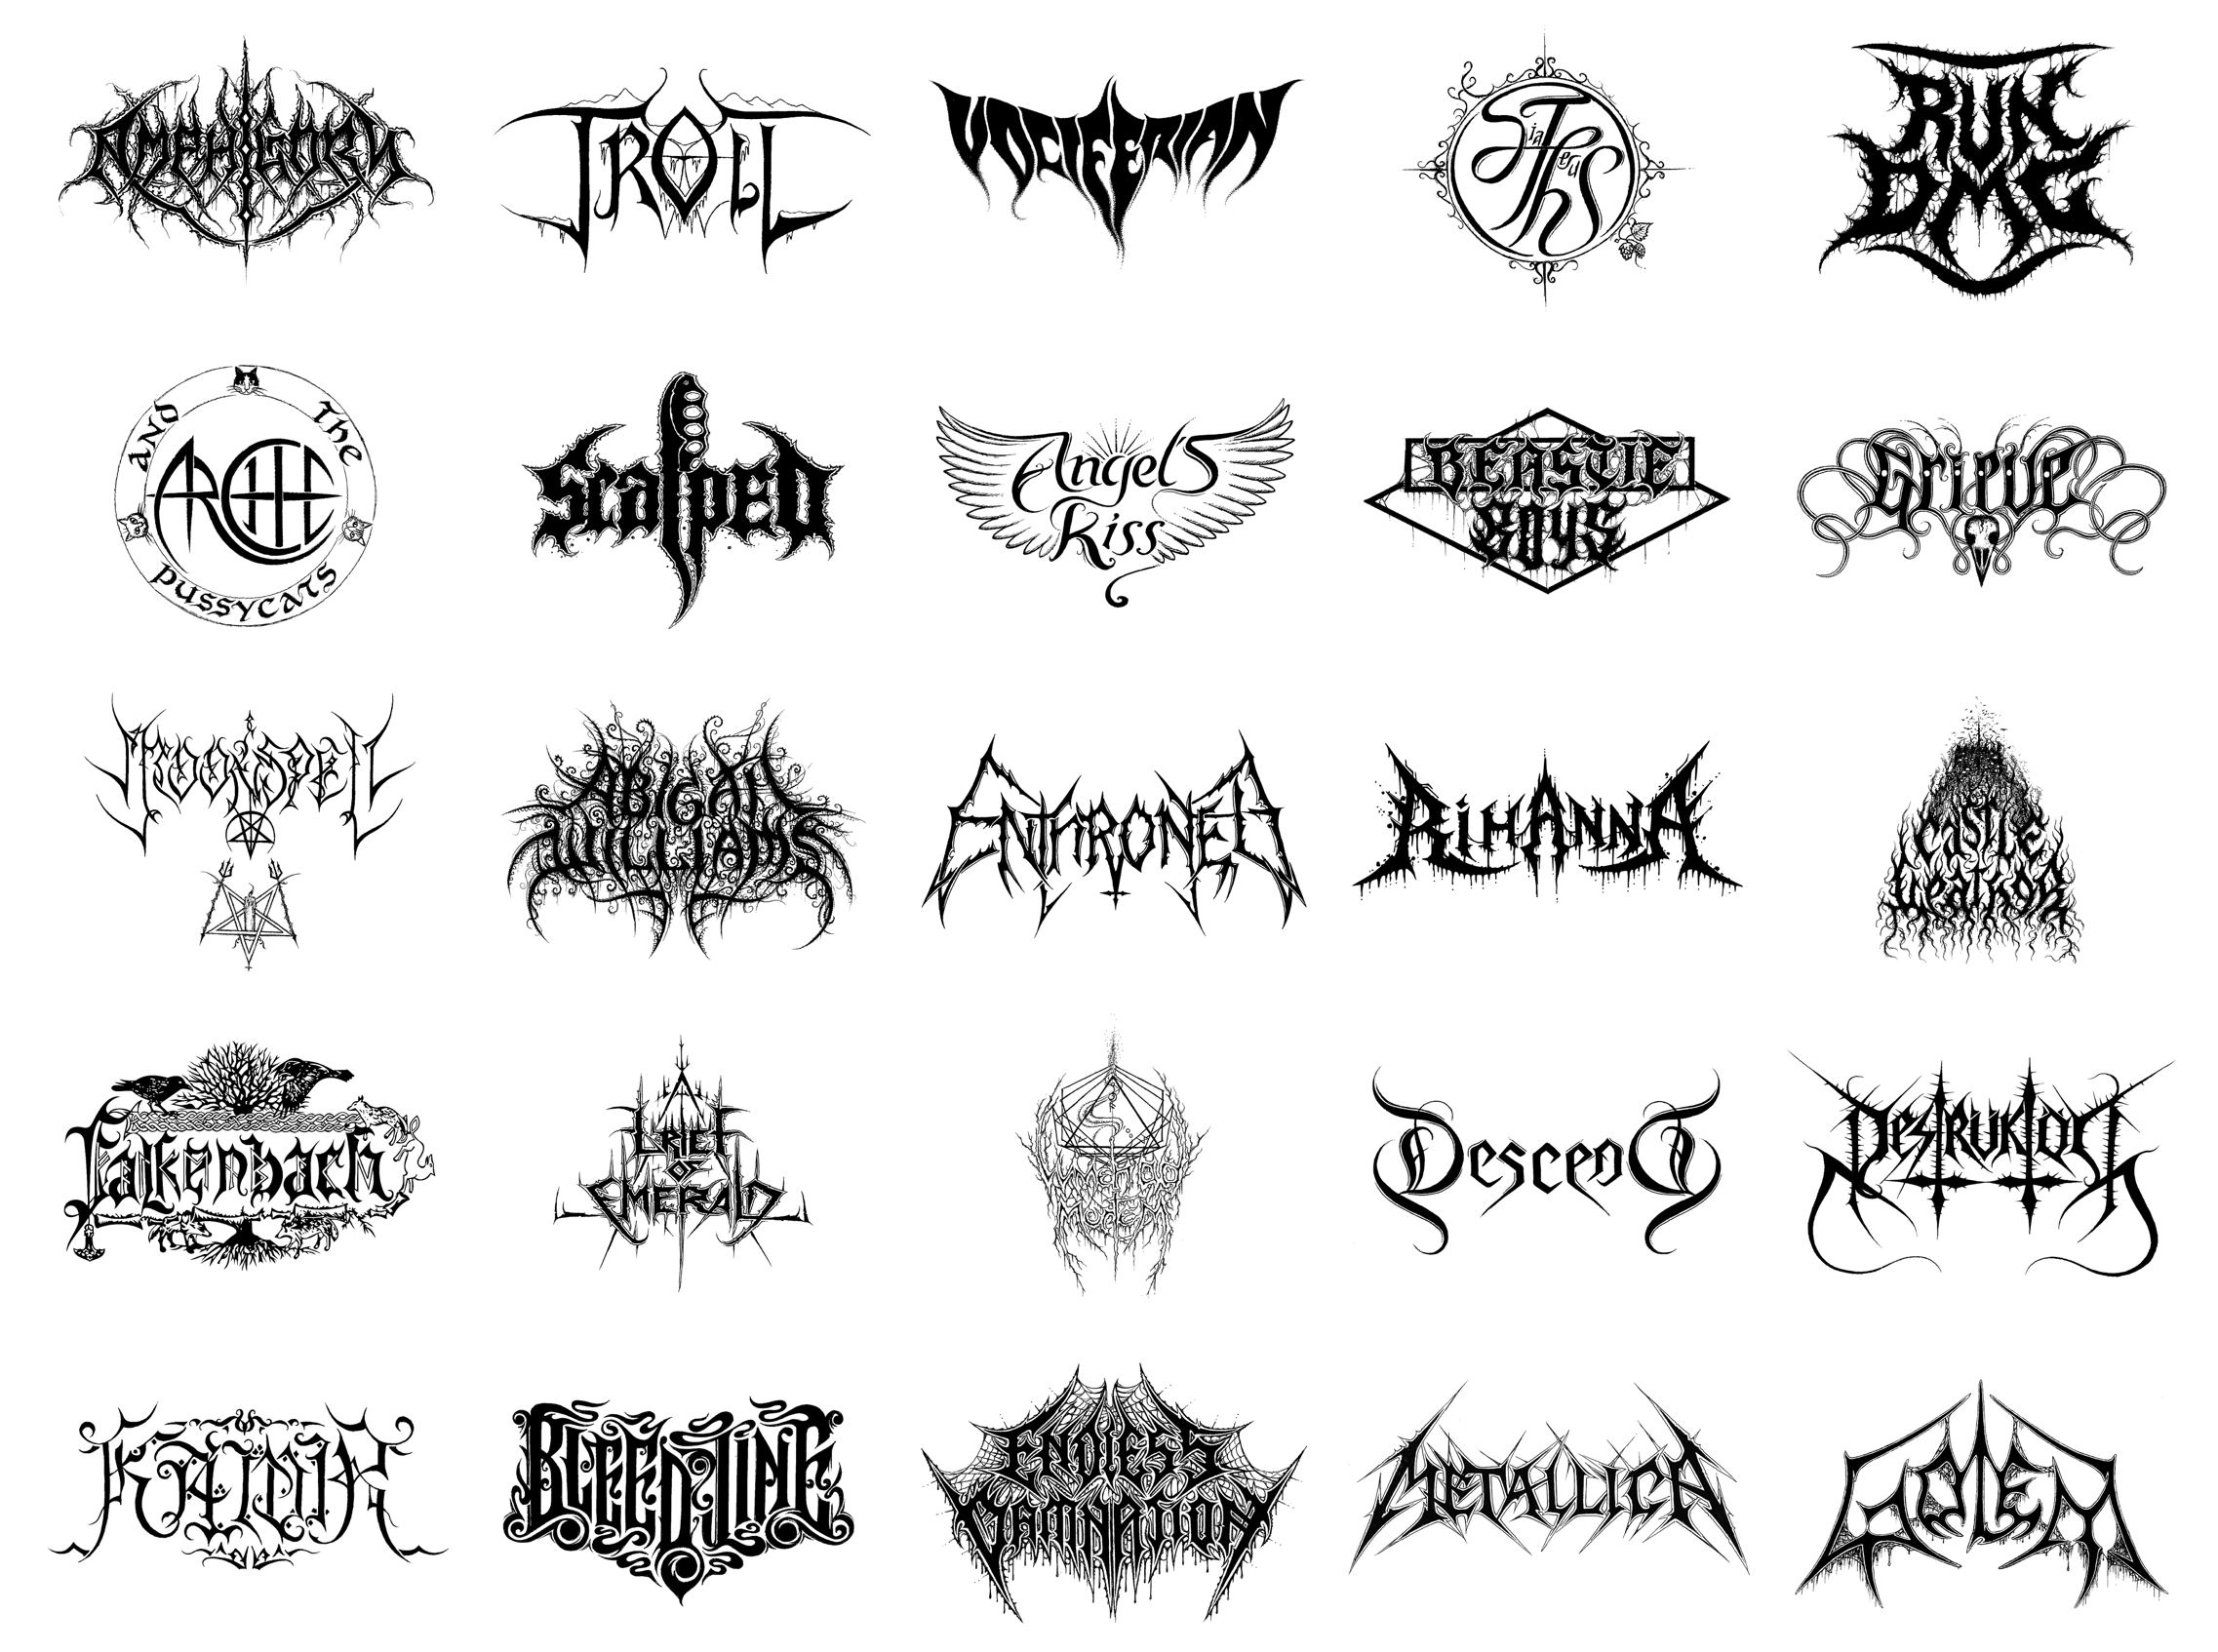 Lord of the Logos designs